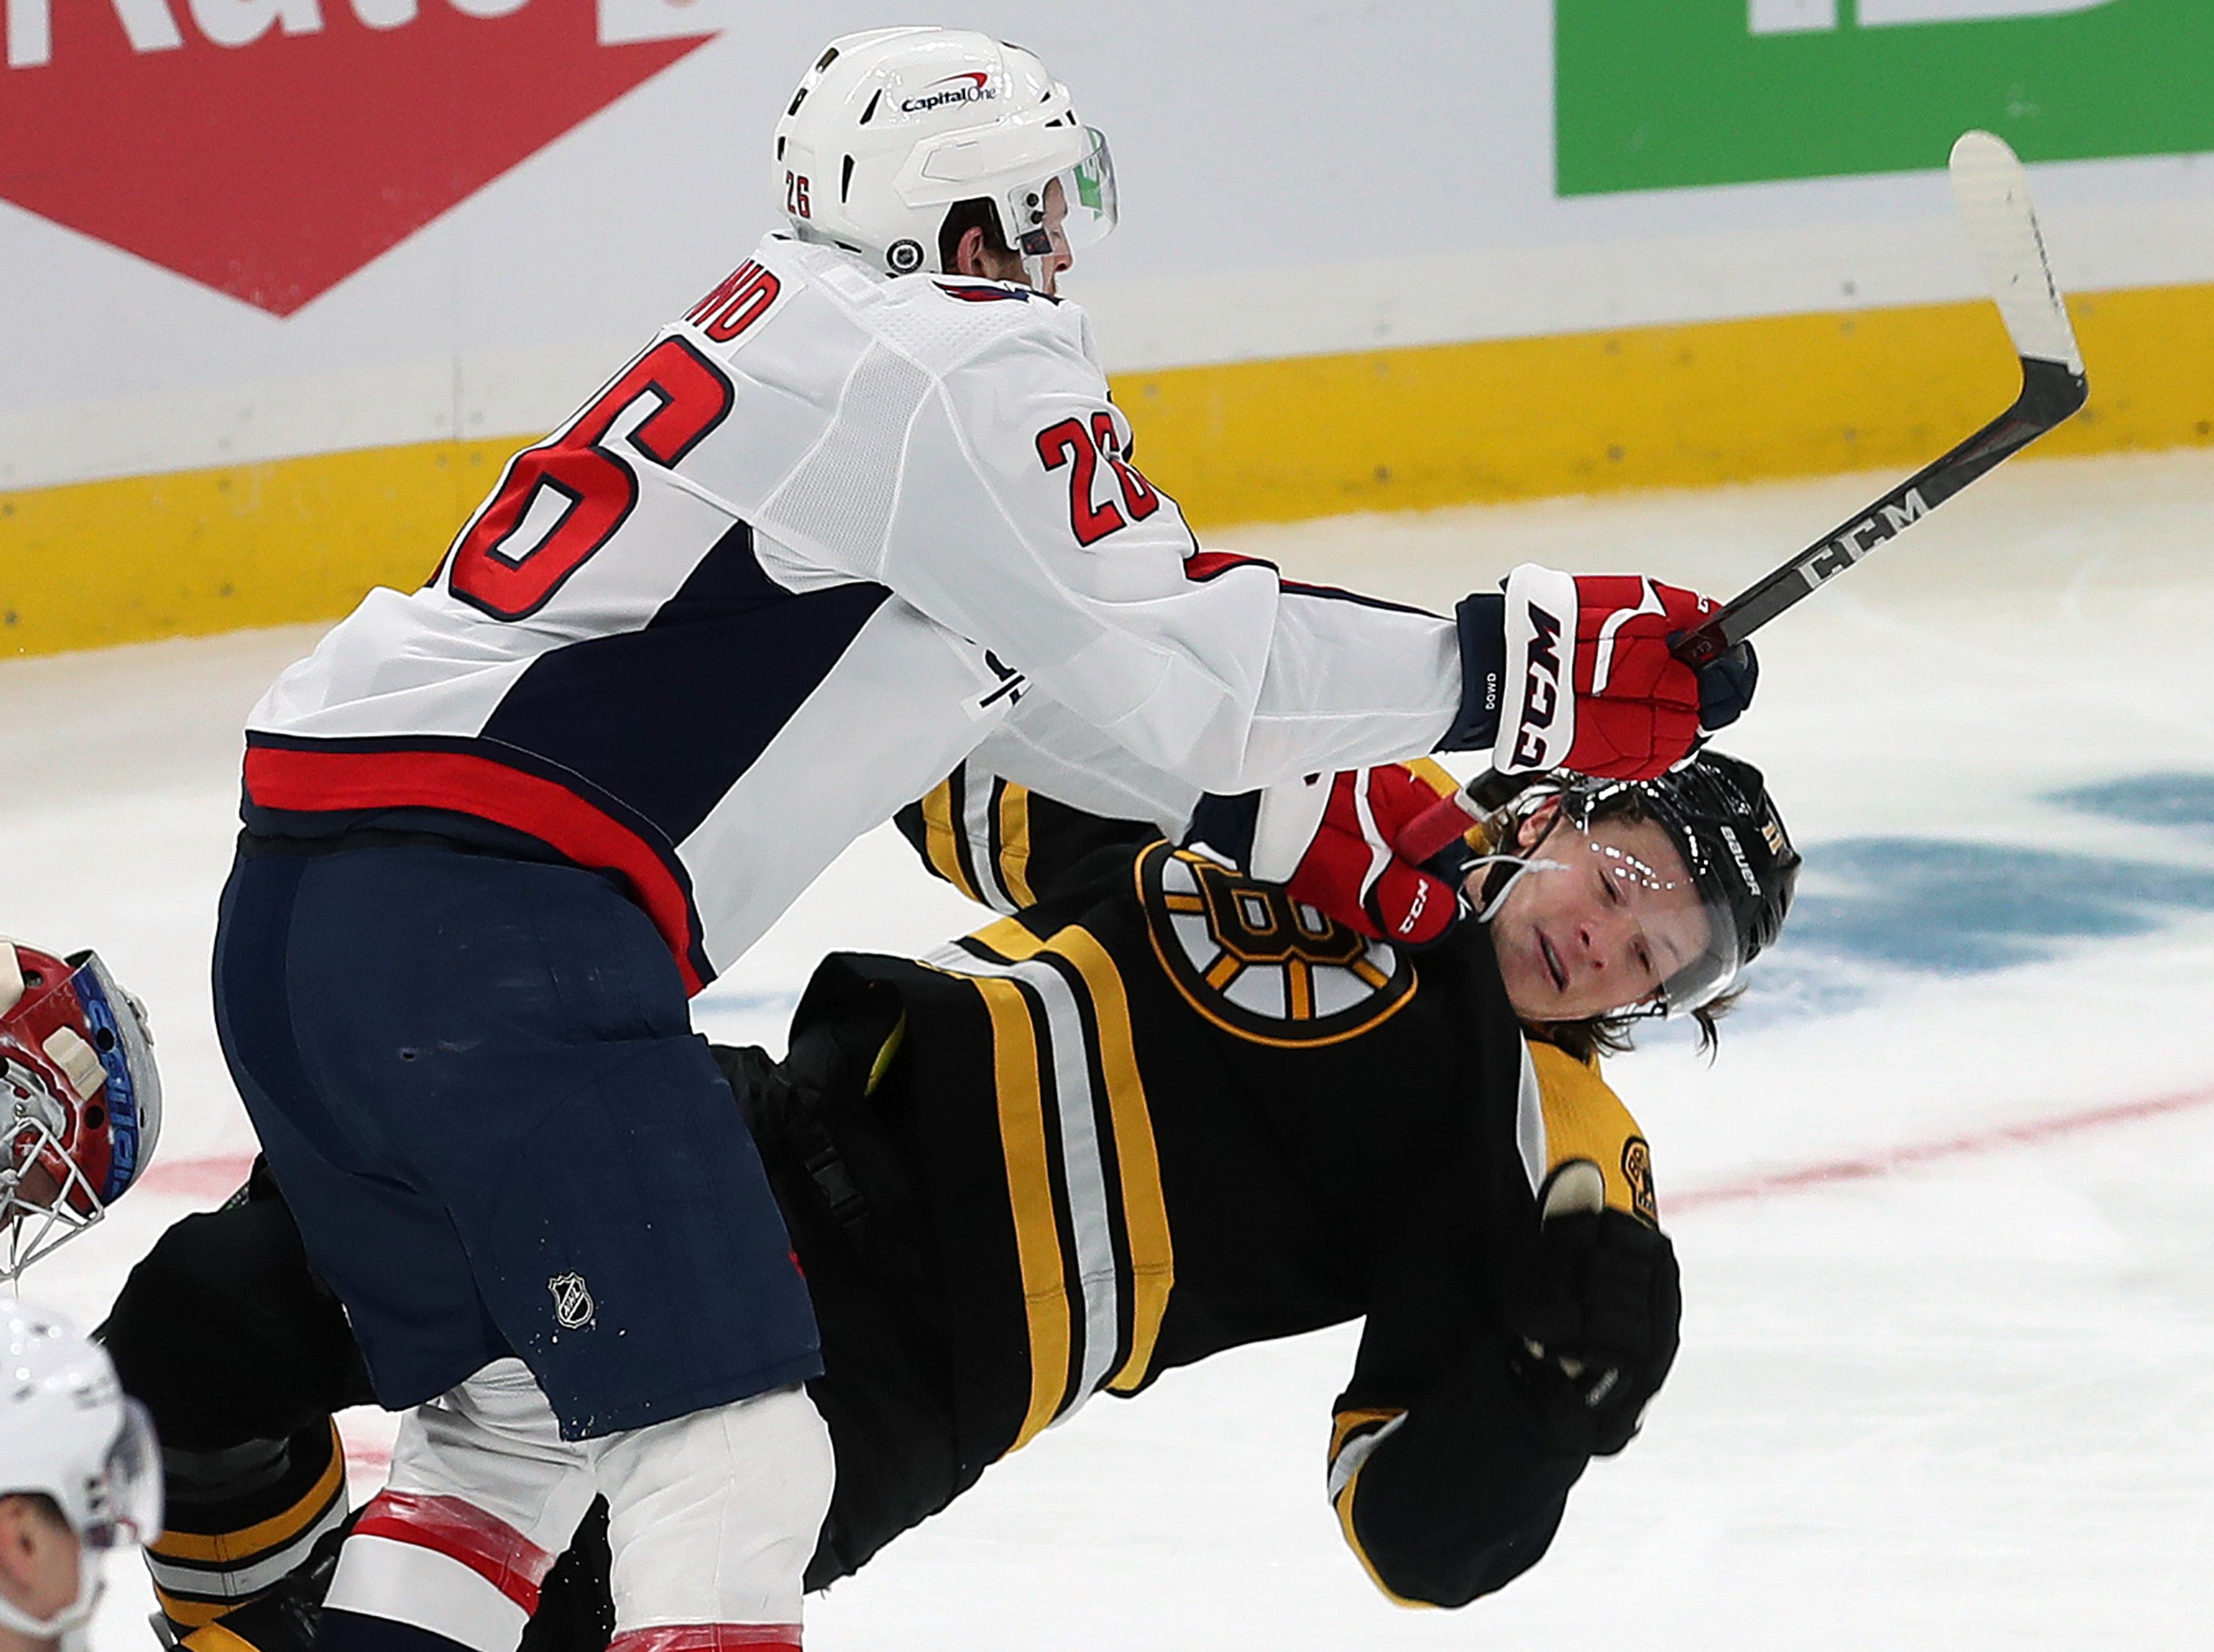 Charlie Coyle COVID-19: Bruins forward out due to NHL coronavirus protocols  